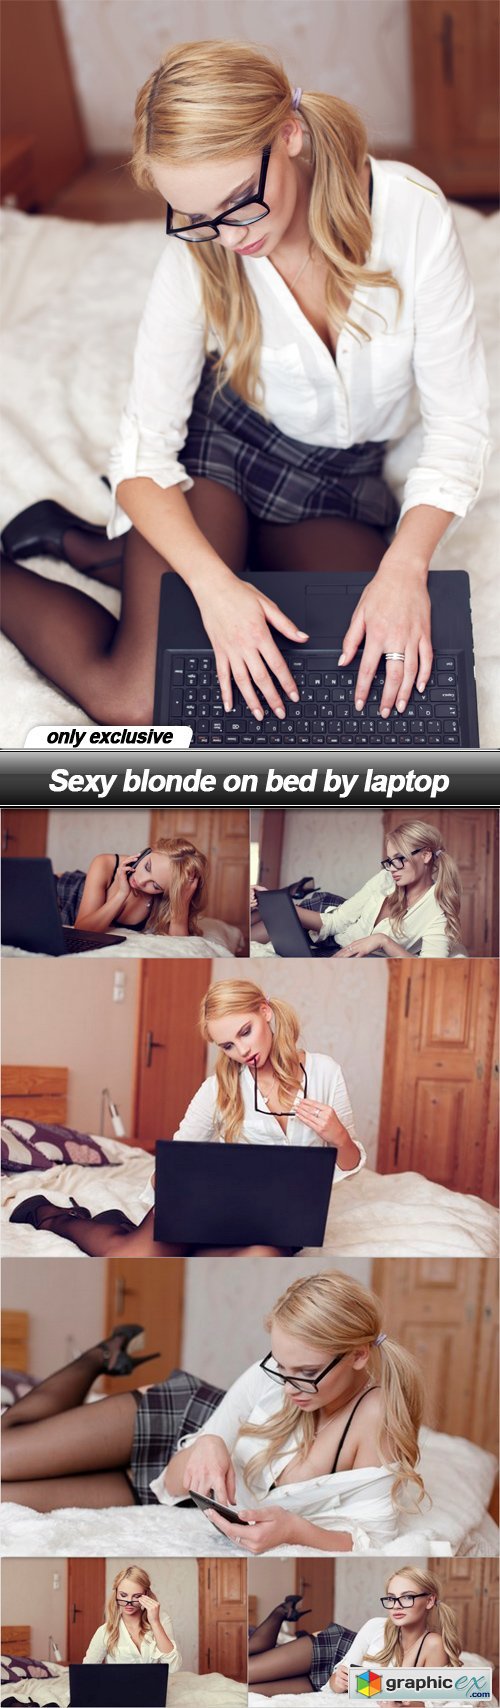 Sexy blonde on bed by laptop - 7 UHQ JPEG